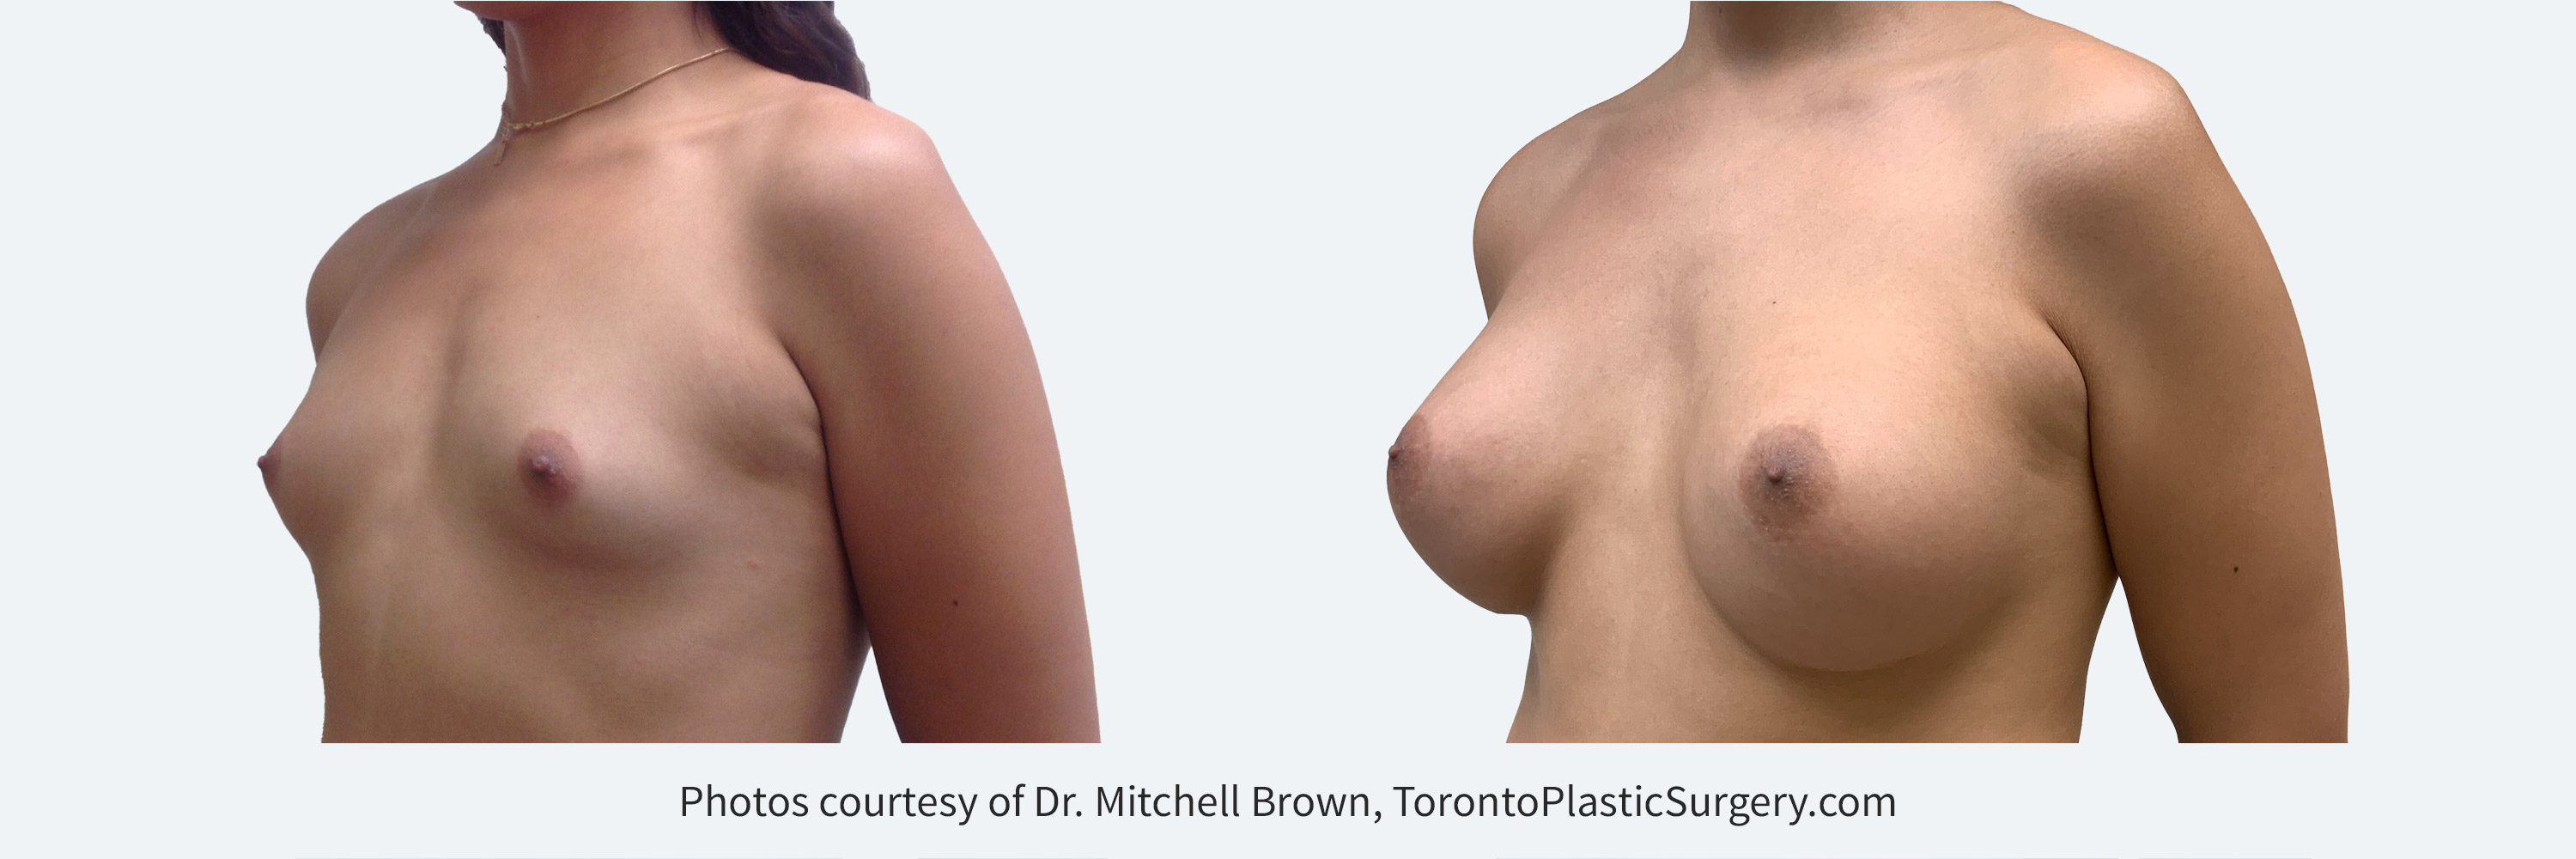 Transfemale Breast Augmentation with 485cc implants, fold incision, Before and 10 months After